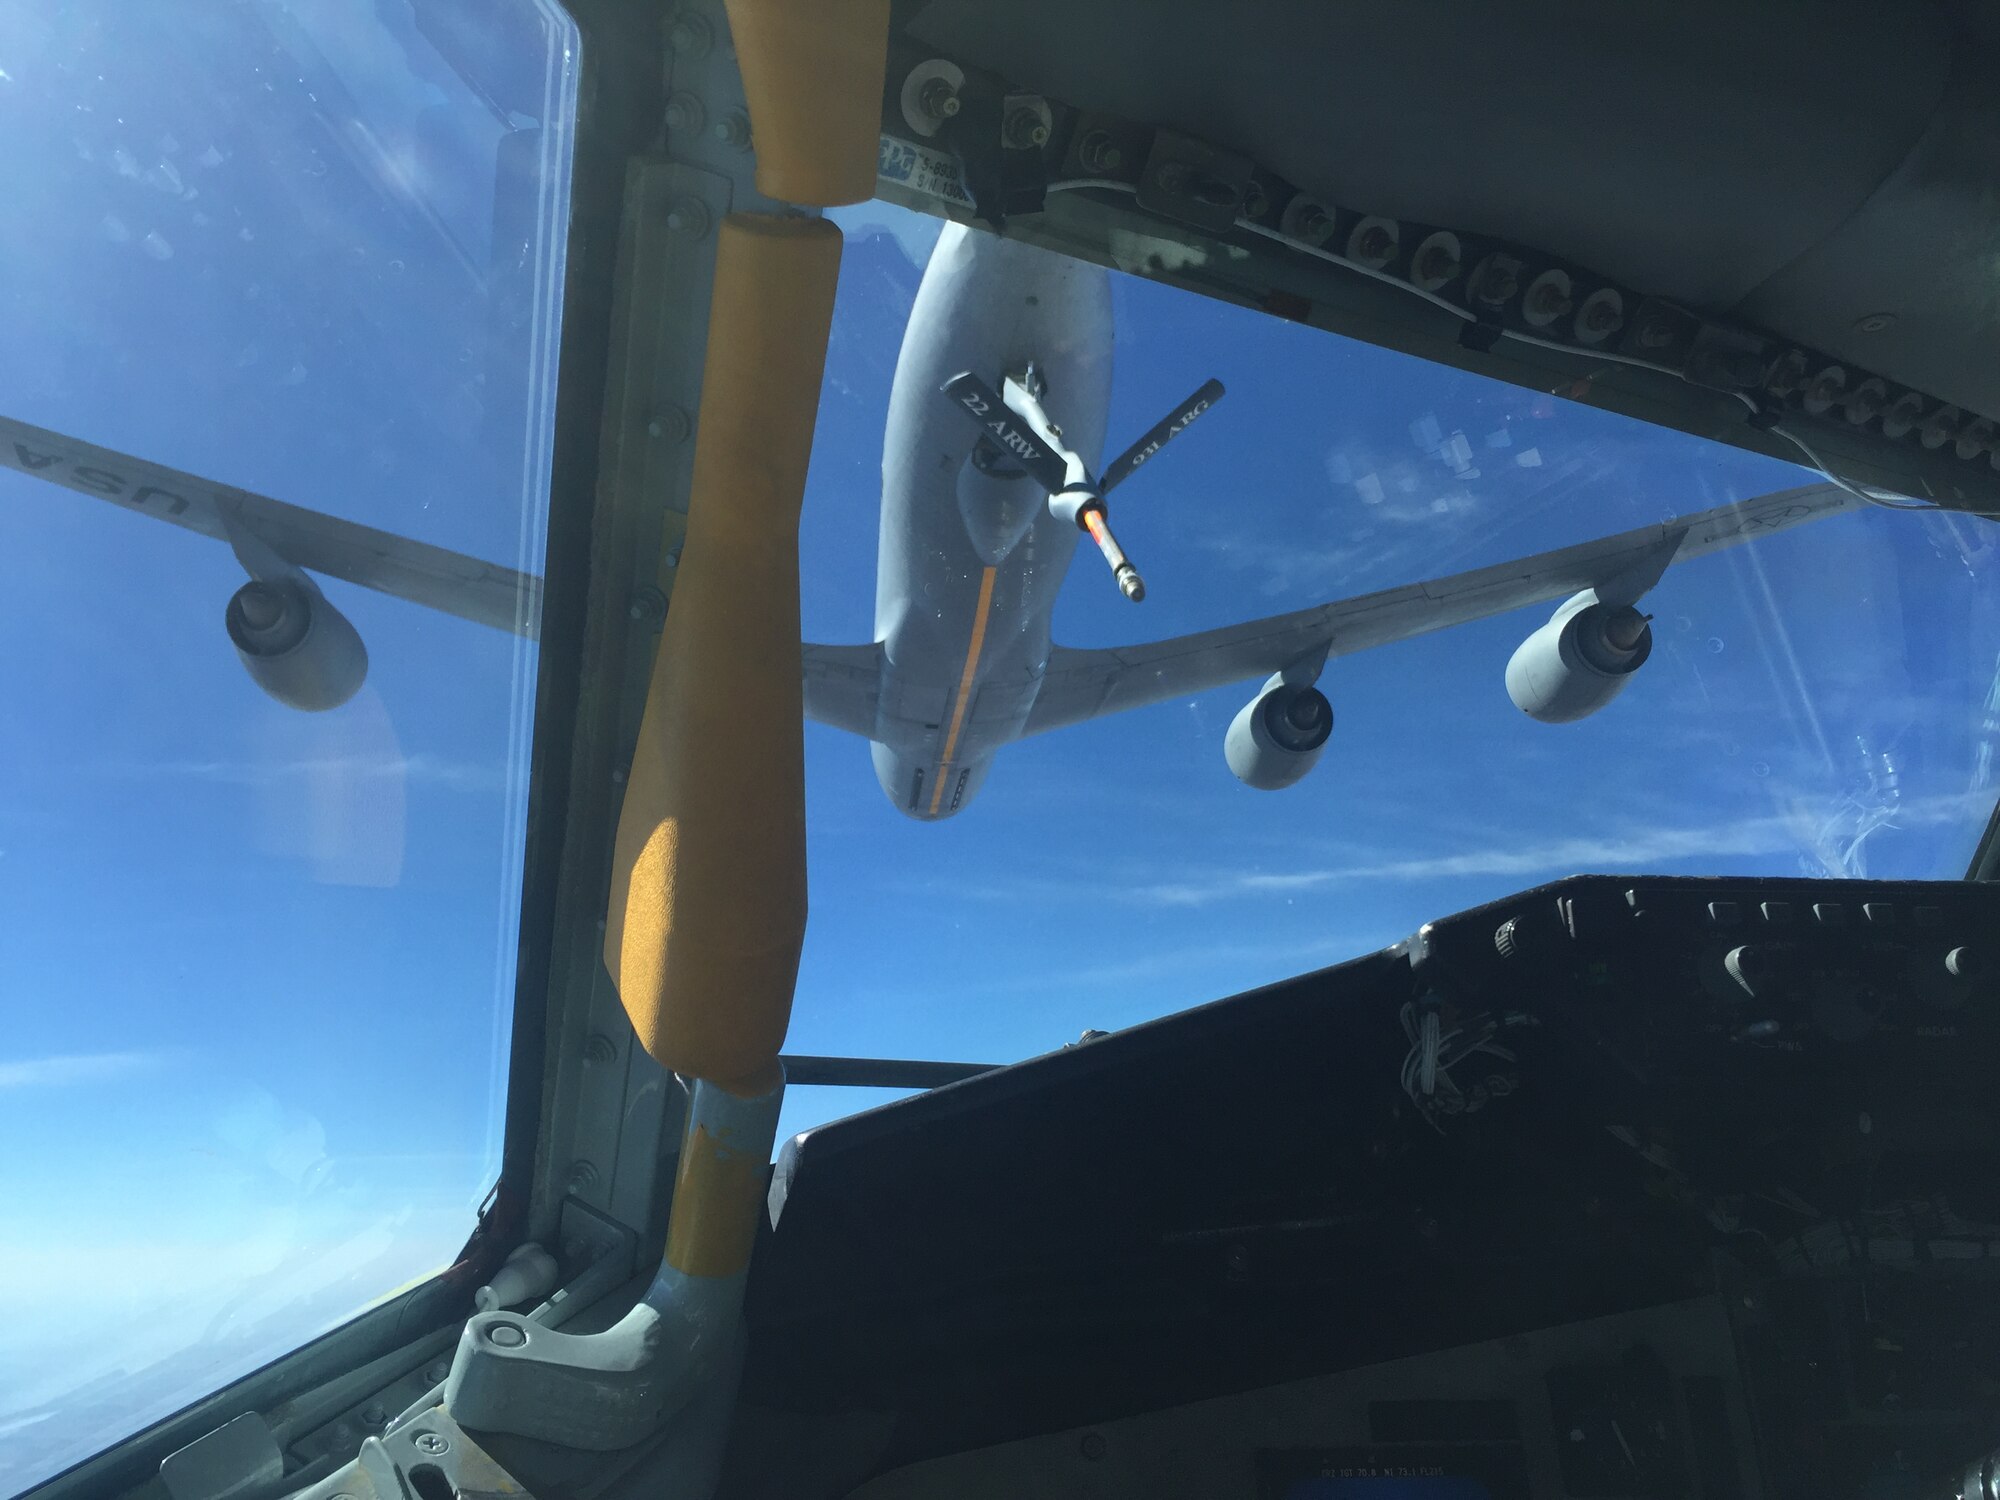 A KC-135 Stratotanker assigned to the 22nd Air Refueling Squadron performs receiver/tanker training during the March Unit Training Assembly, March 5, 2016, McConnell Air Force Base, Kan.  Both KC-135s were operated by a crew of airmen from the 931st Air Refueling Wing. (U.S. Air Force photo by Senior Master Sgt. Ray Lewis)